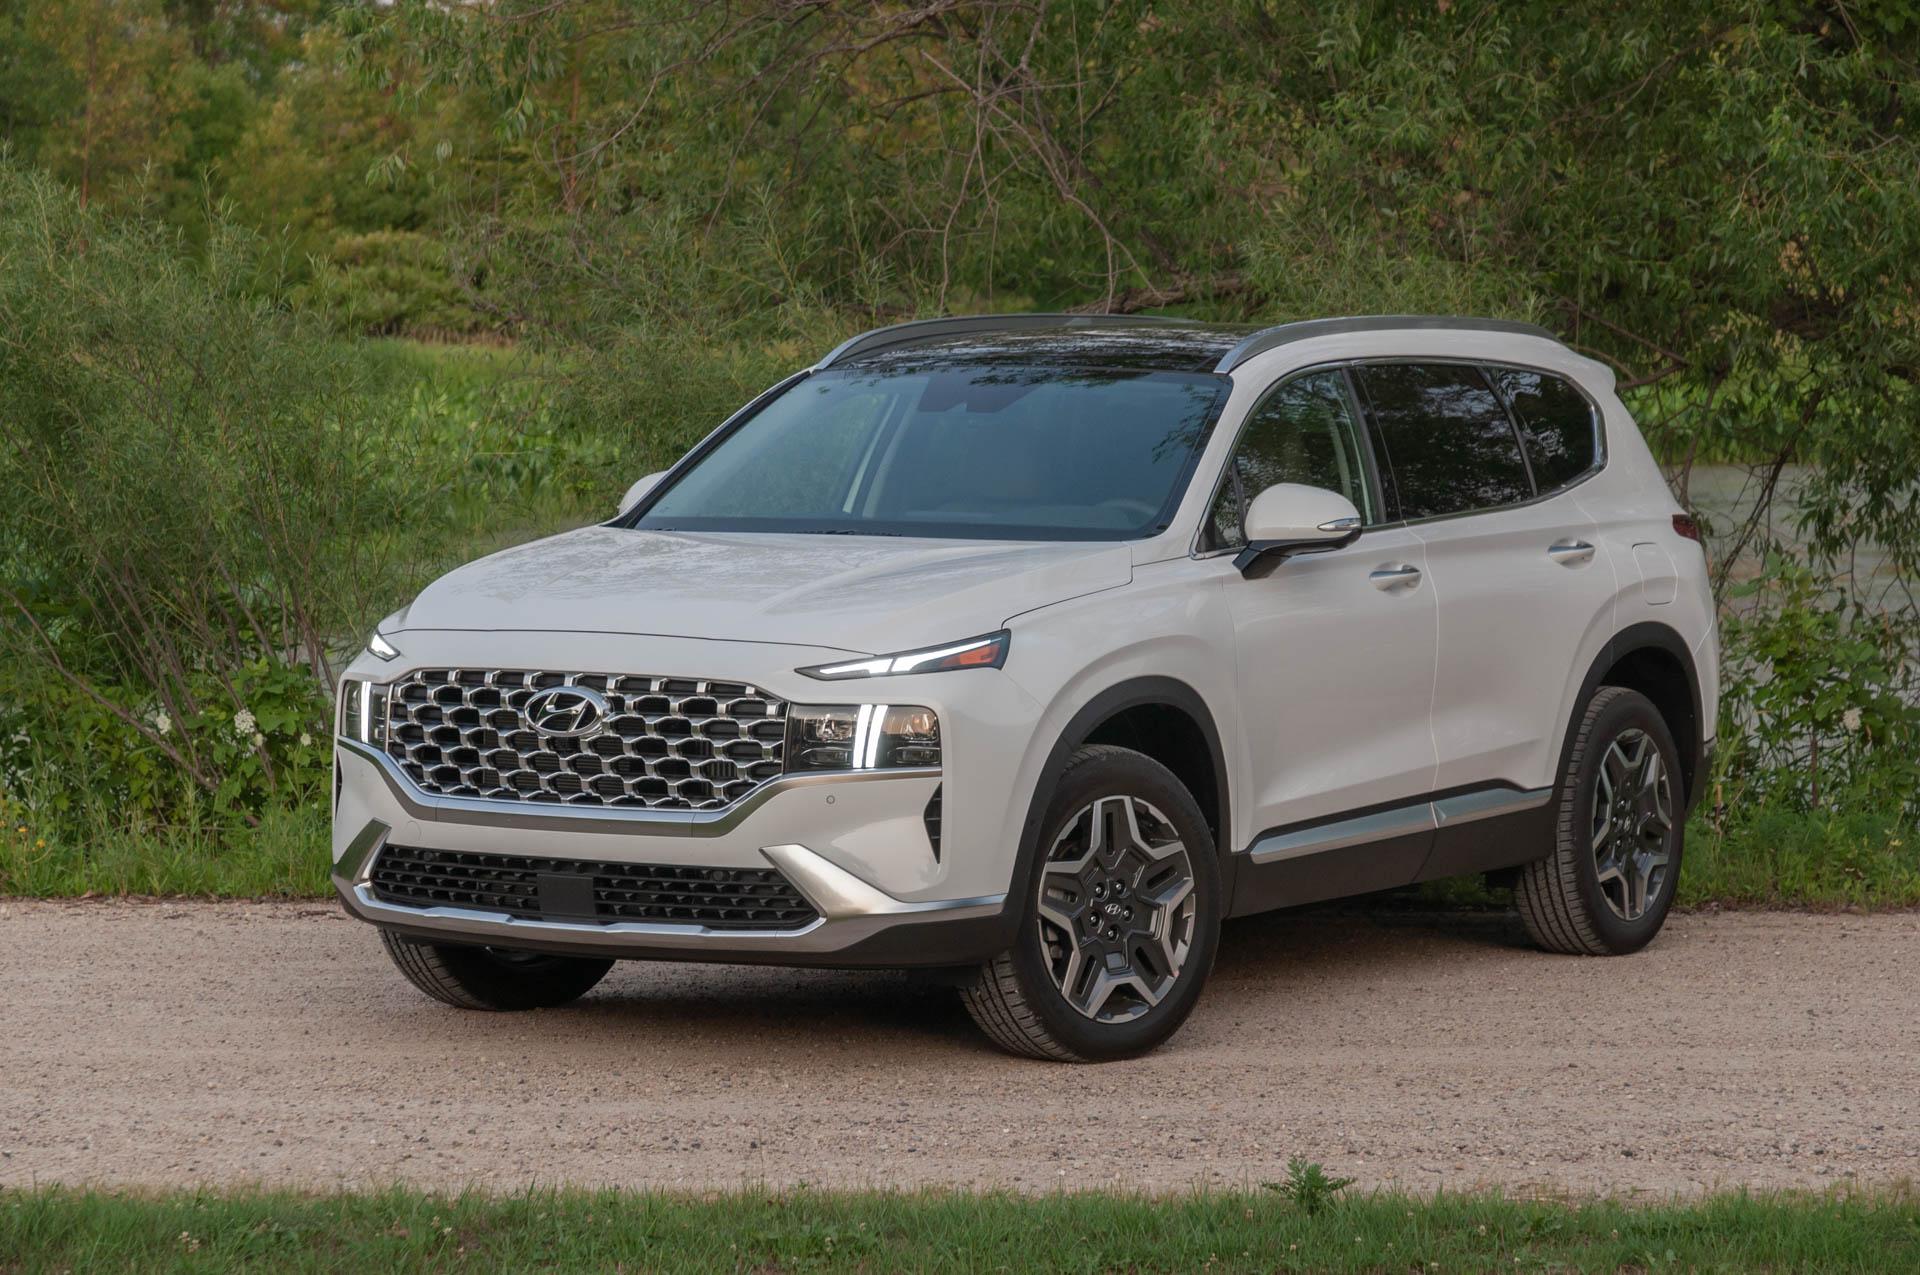 2021 Hyundai Santa Fe Hybrid finds a new middle ground for efficient 